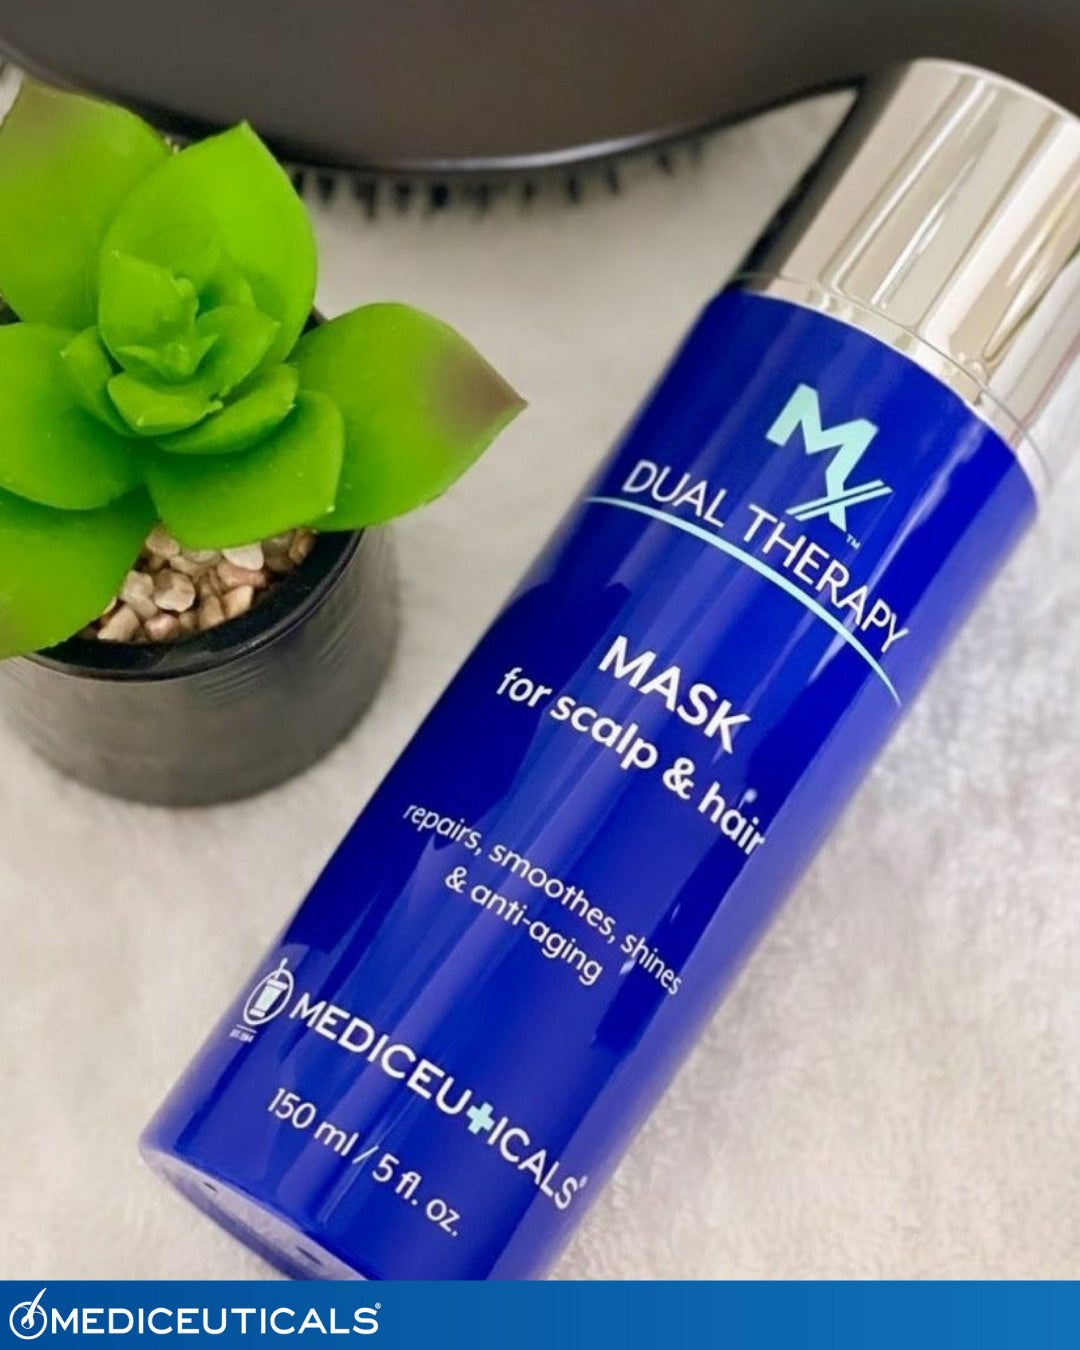 Mediceuticals MX Dual Therapy Mask